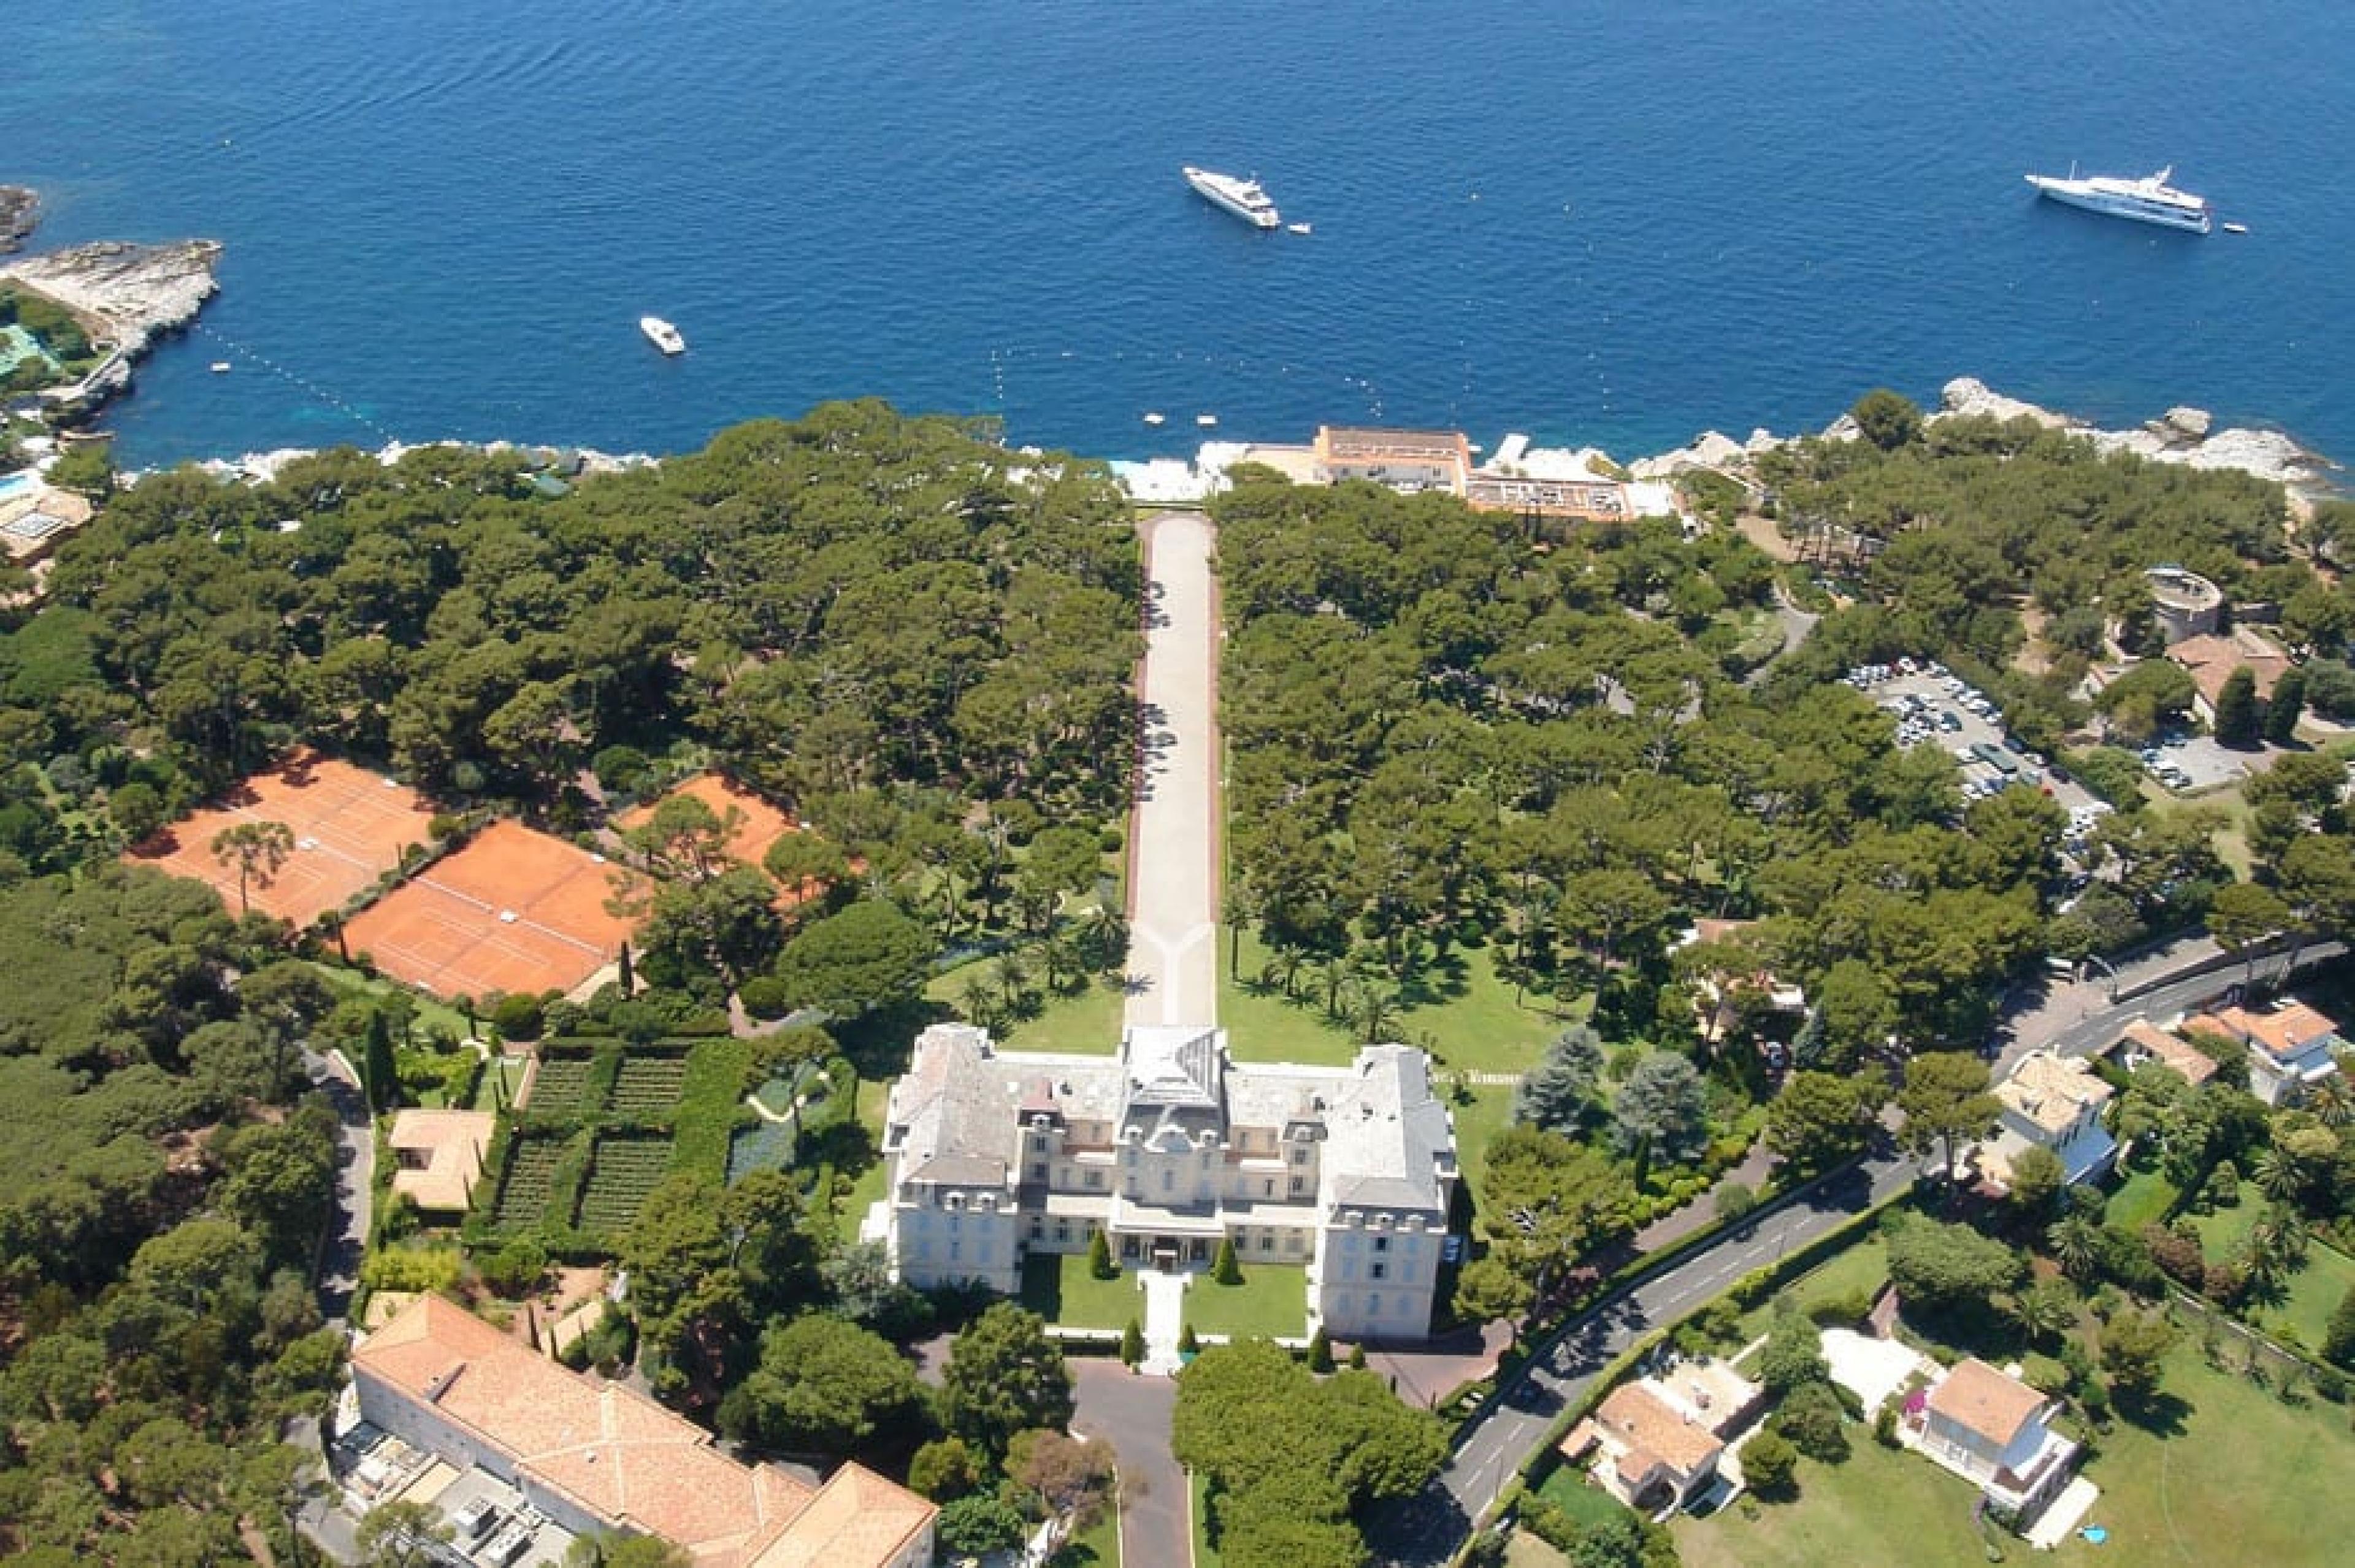 Aerial View of grounds and ocean at Hotel du Cap-Eden-Roc, French Riviera, France